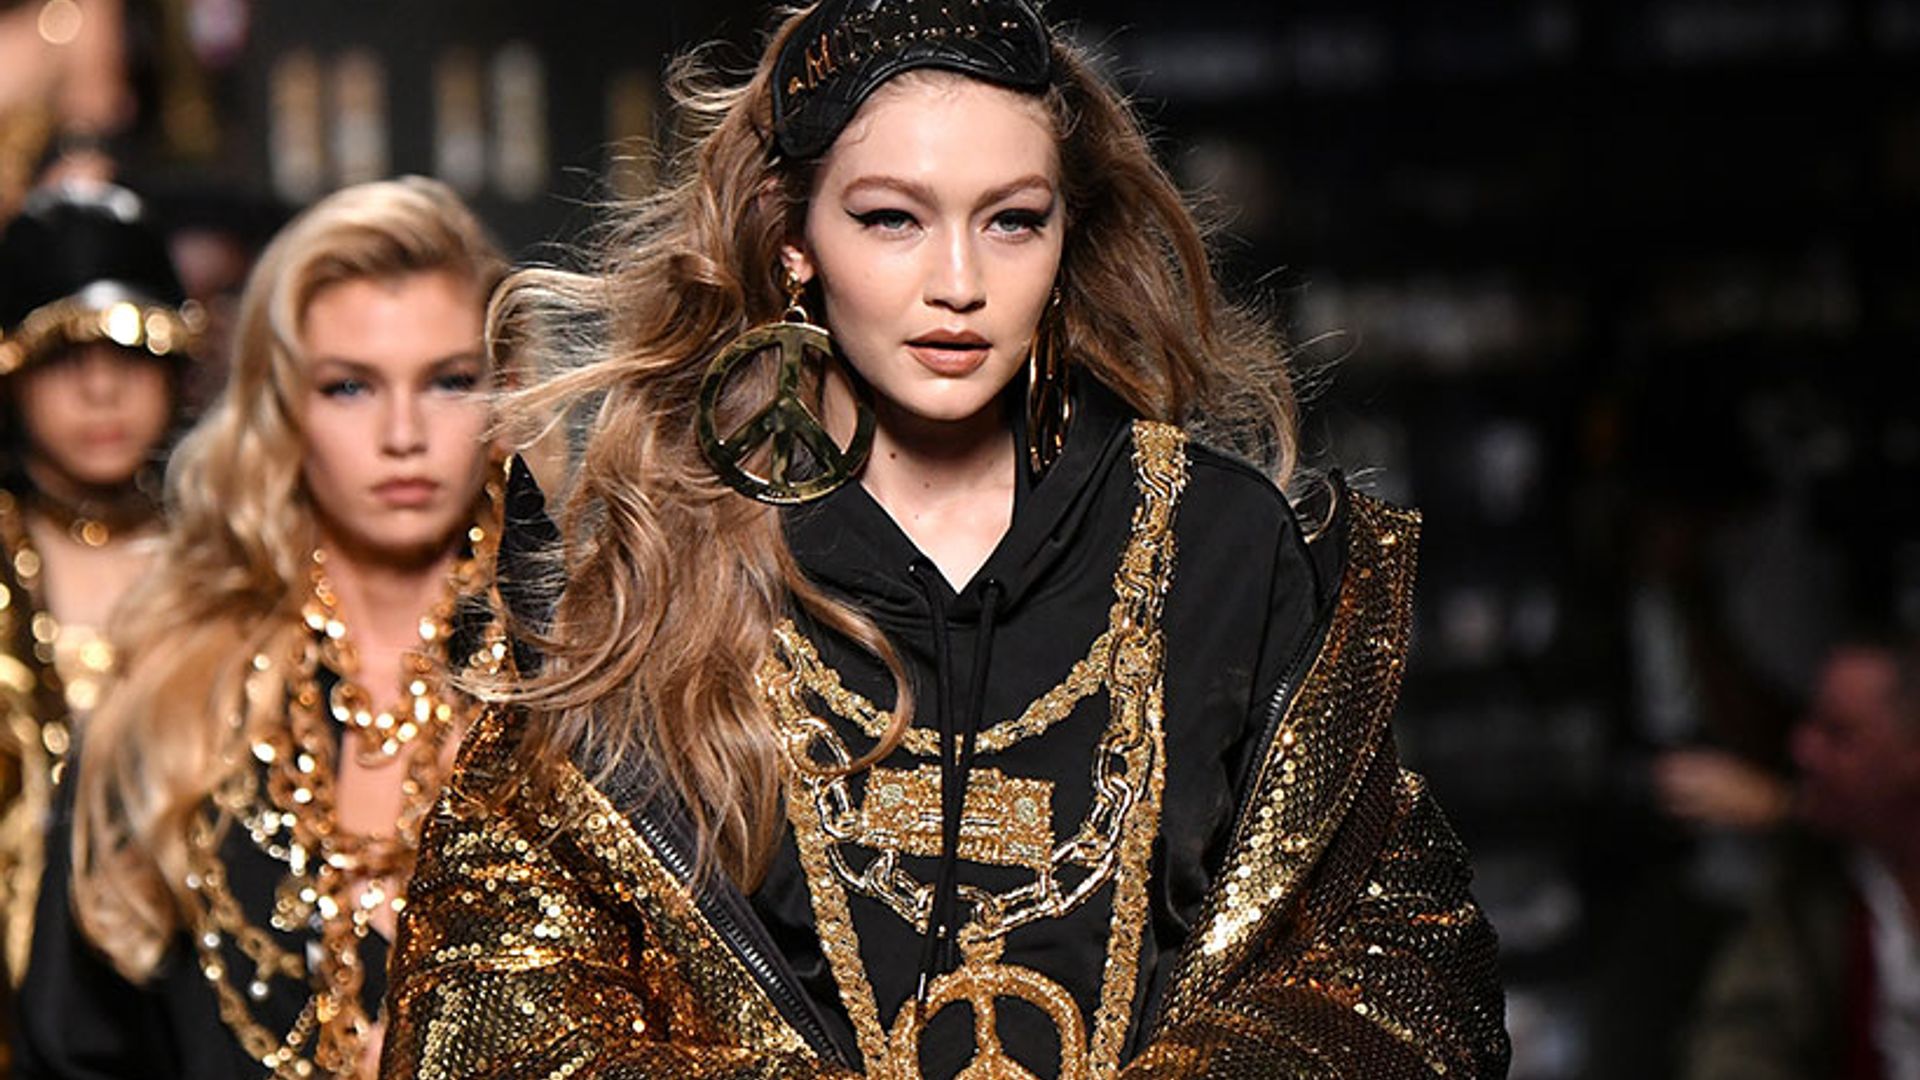 Here's your first look at the H&M x Moschino fashion collection